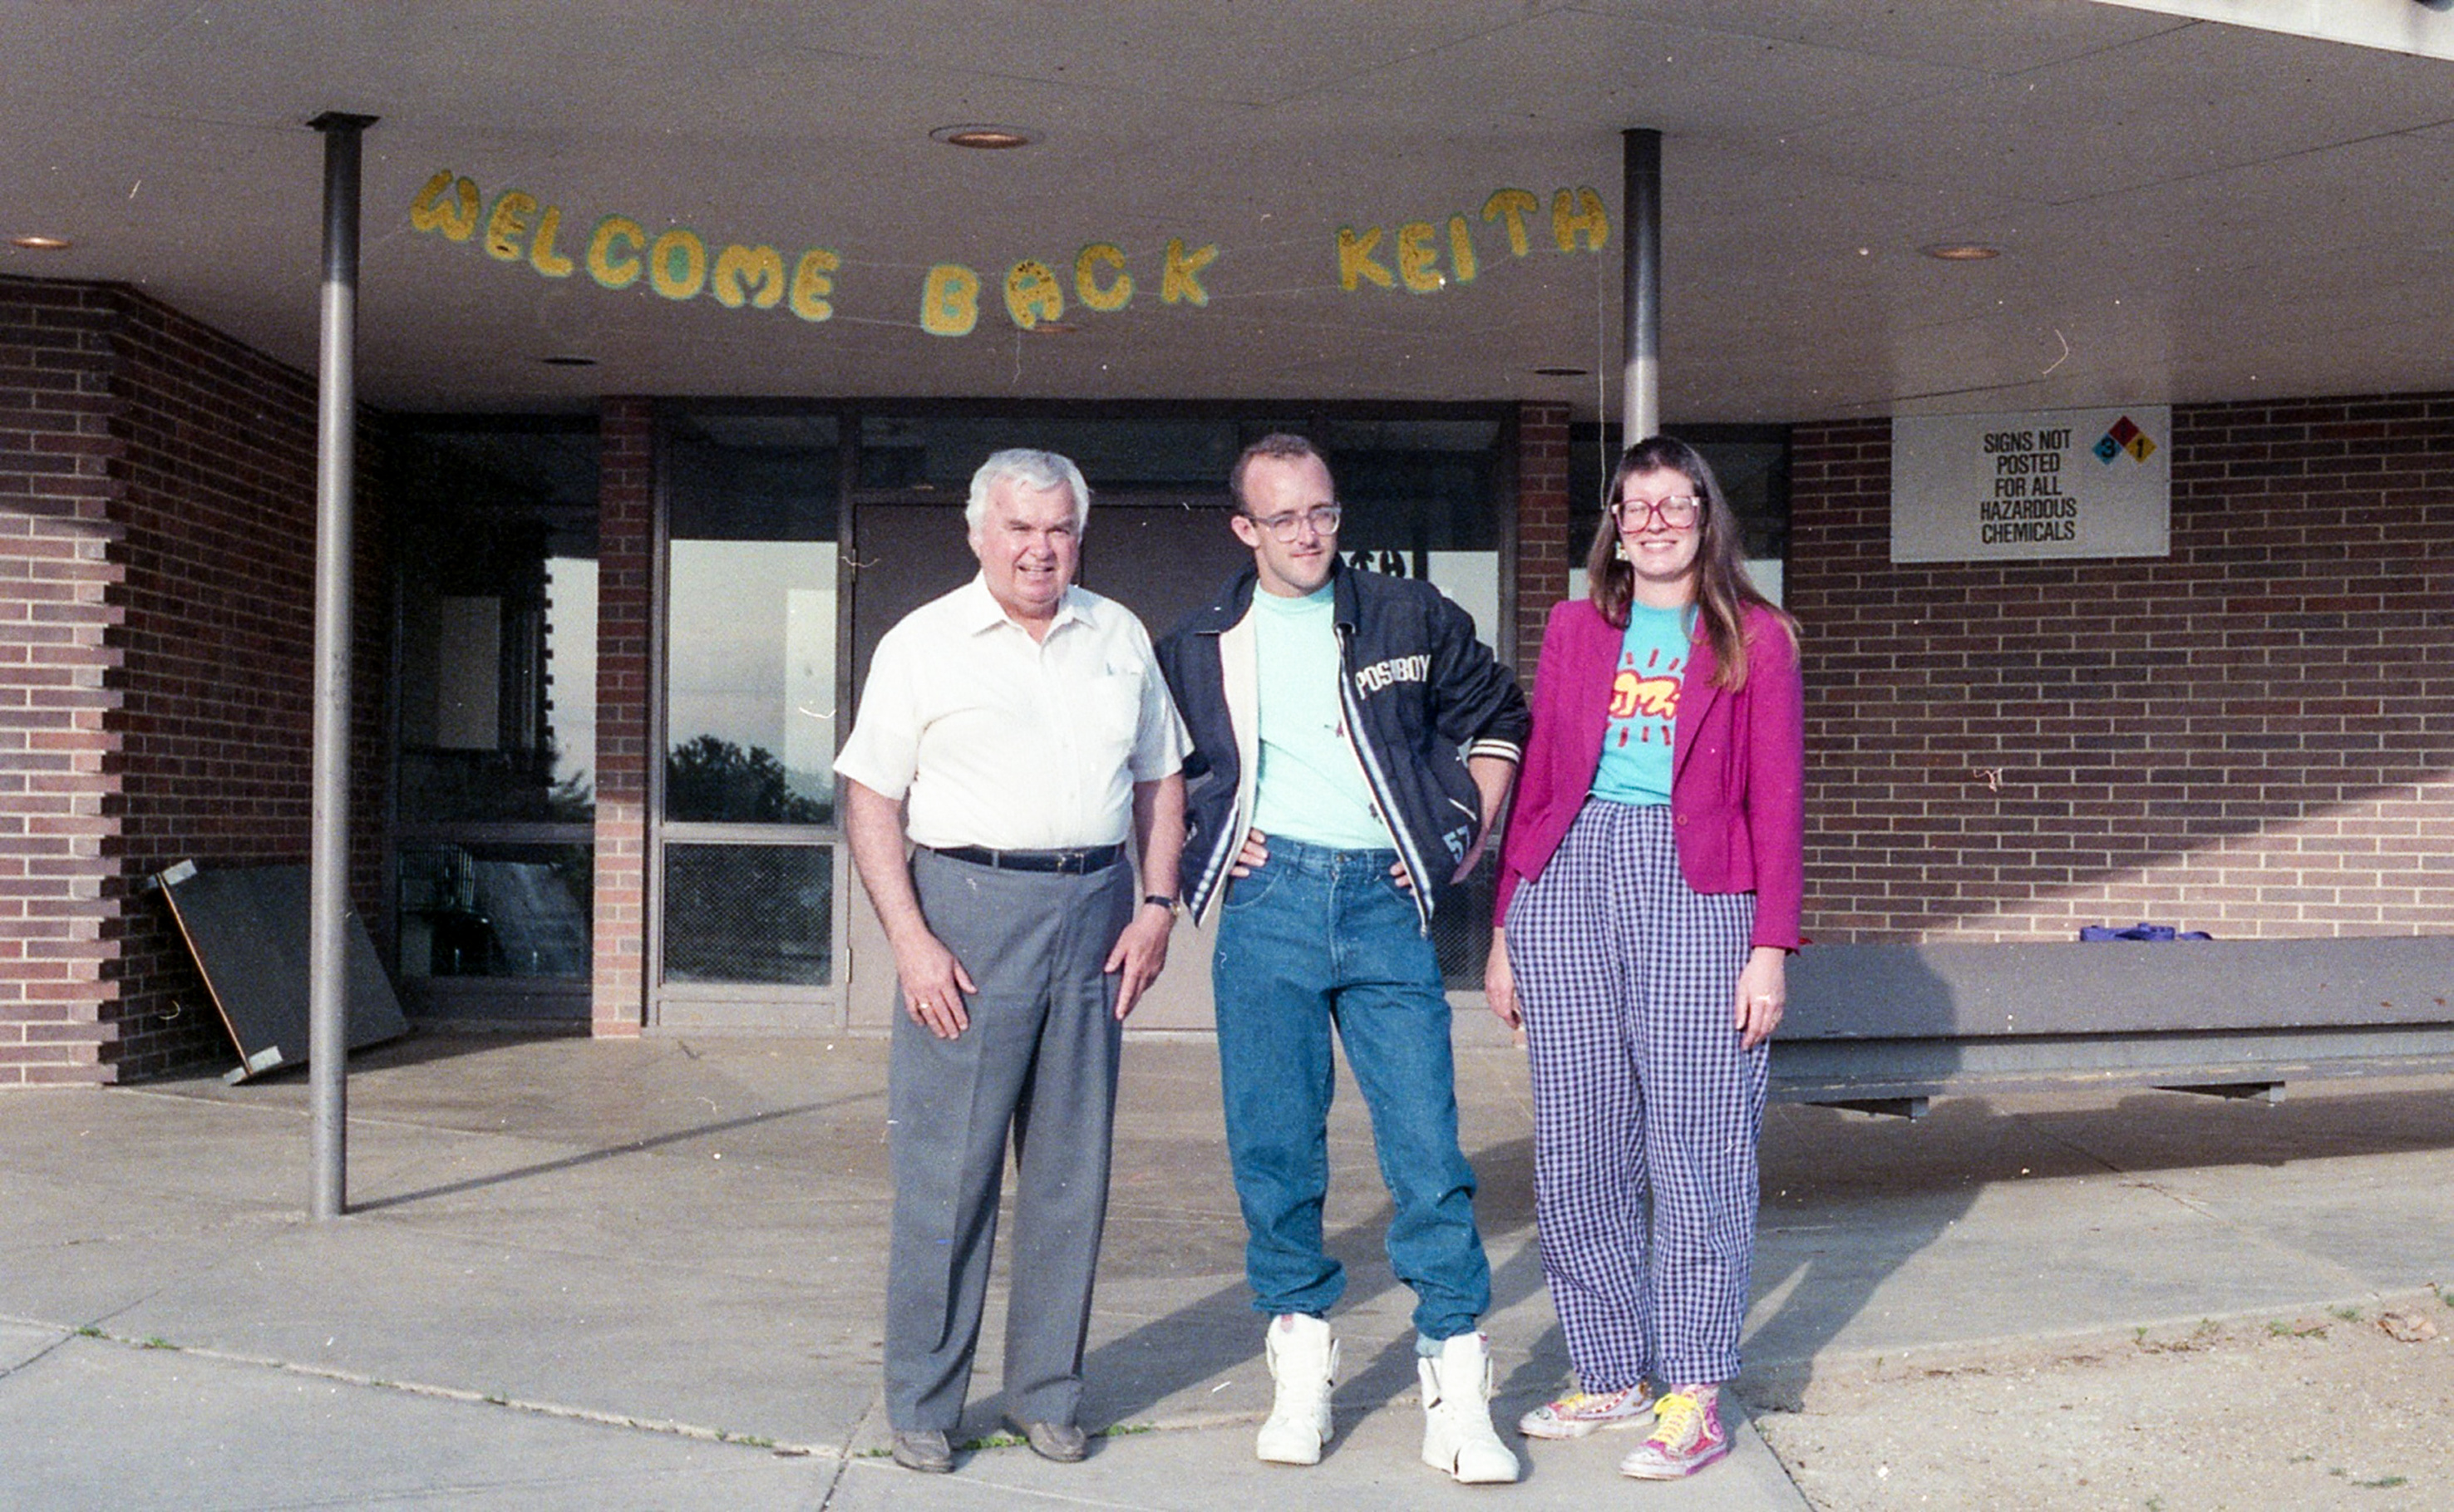 Paul E. Davis, principal of Ernest Horn Elementary School, Keith Haring, and art teacher Colleen Ernst pose in front of the school